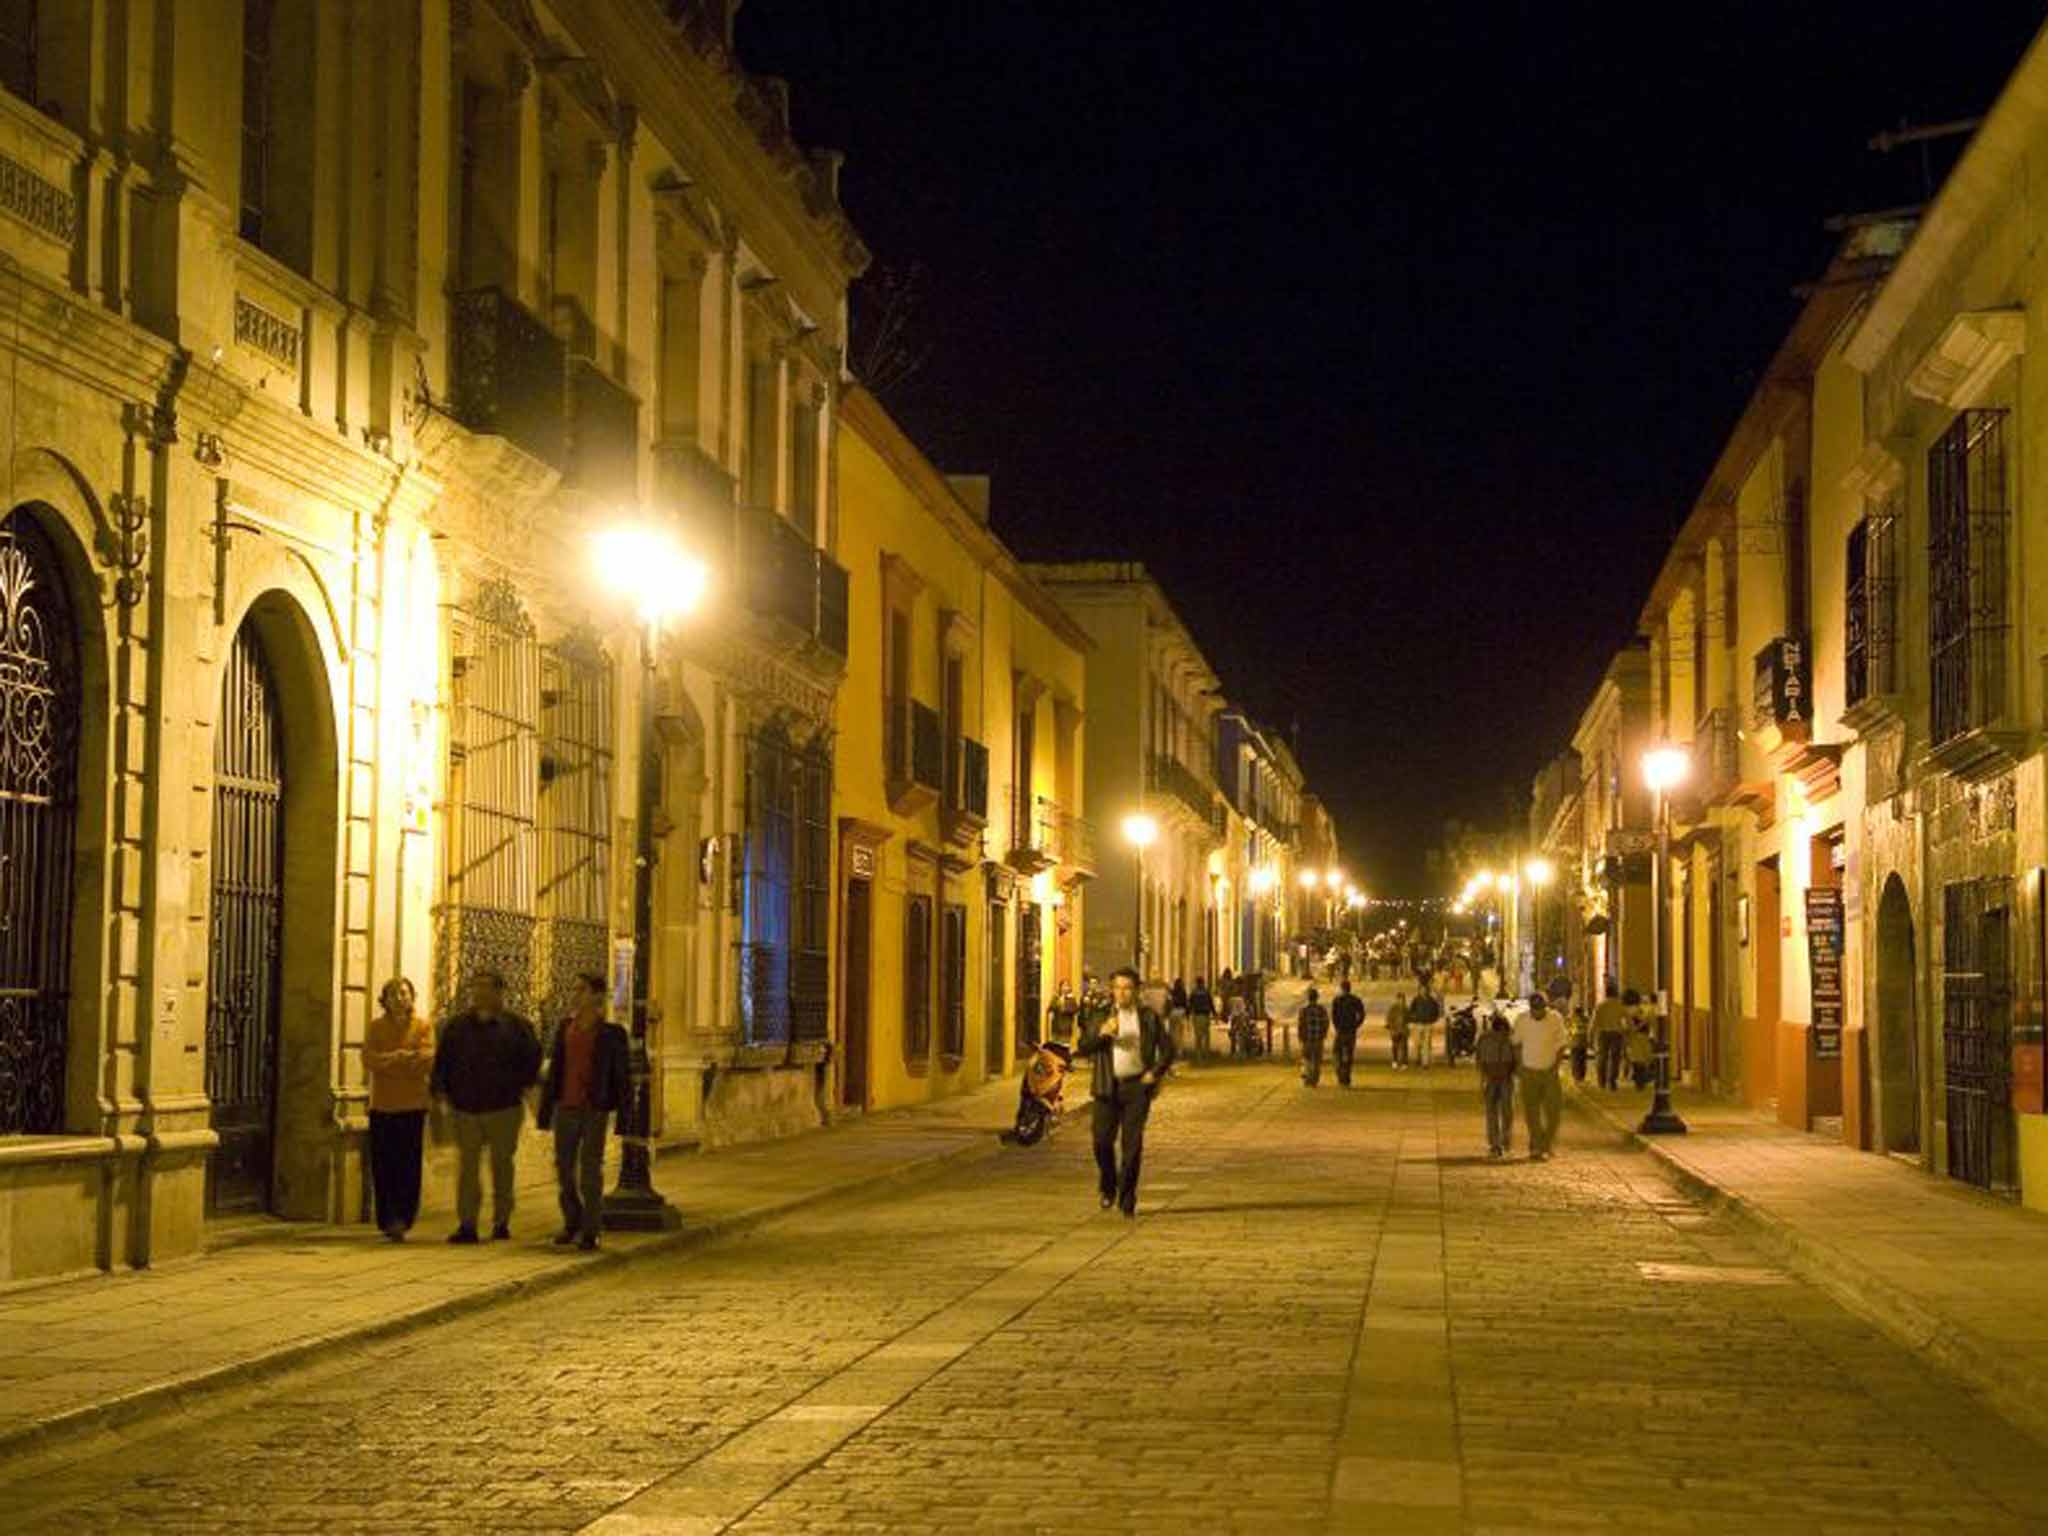 Ancient Oaxaca is, for many travellers, the highlight of Mexico